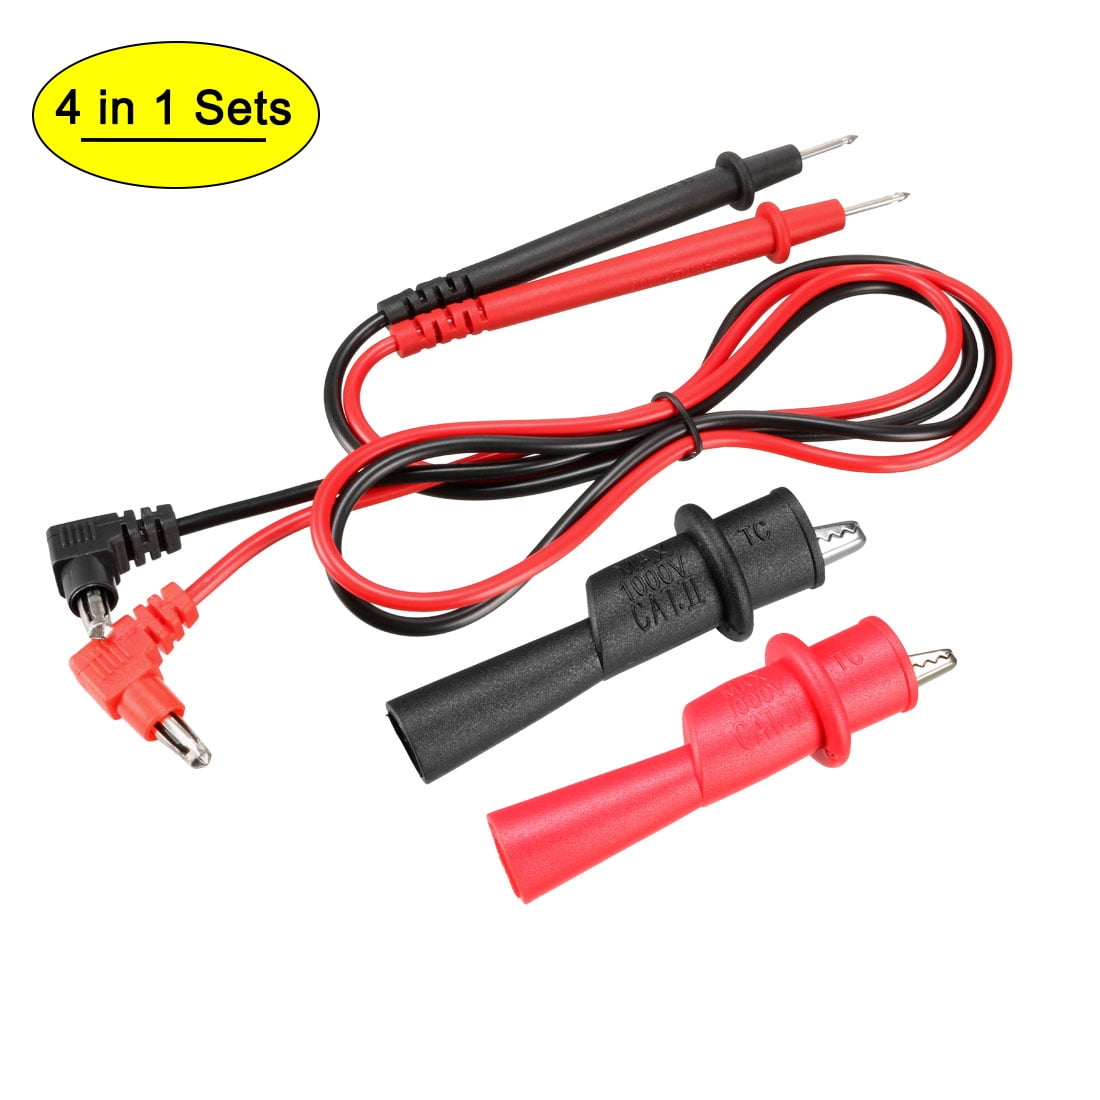 Test Leads for Power supply Multimeter 1 Meter cable banana plug Clips alligator 